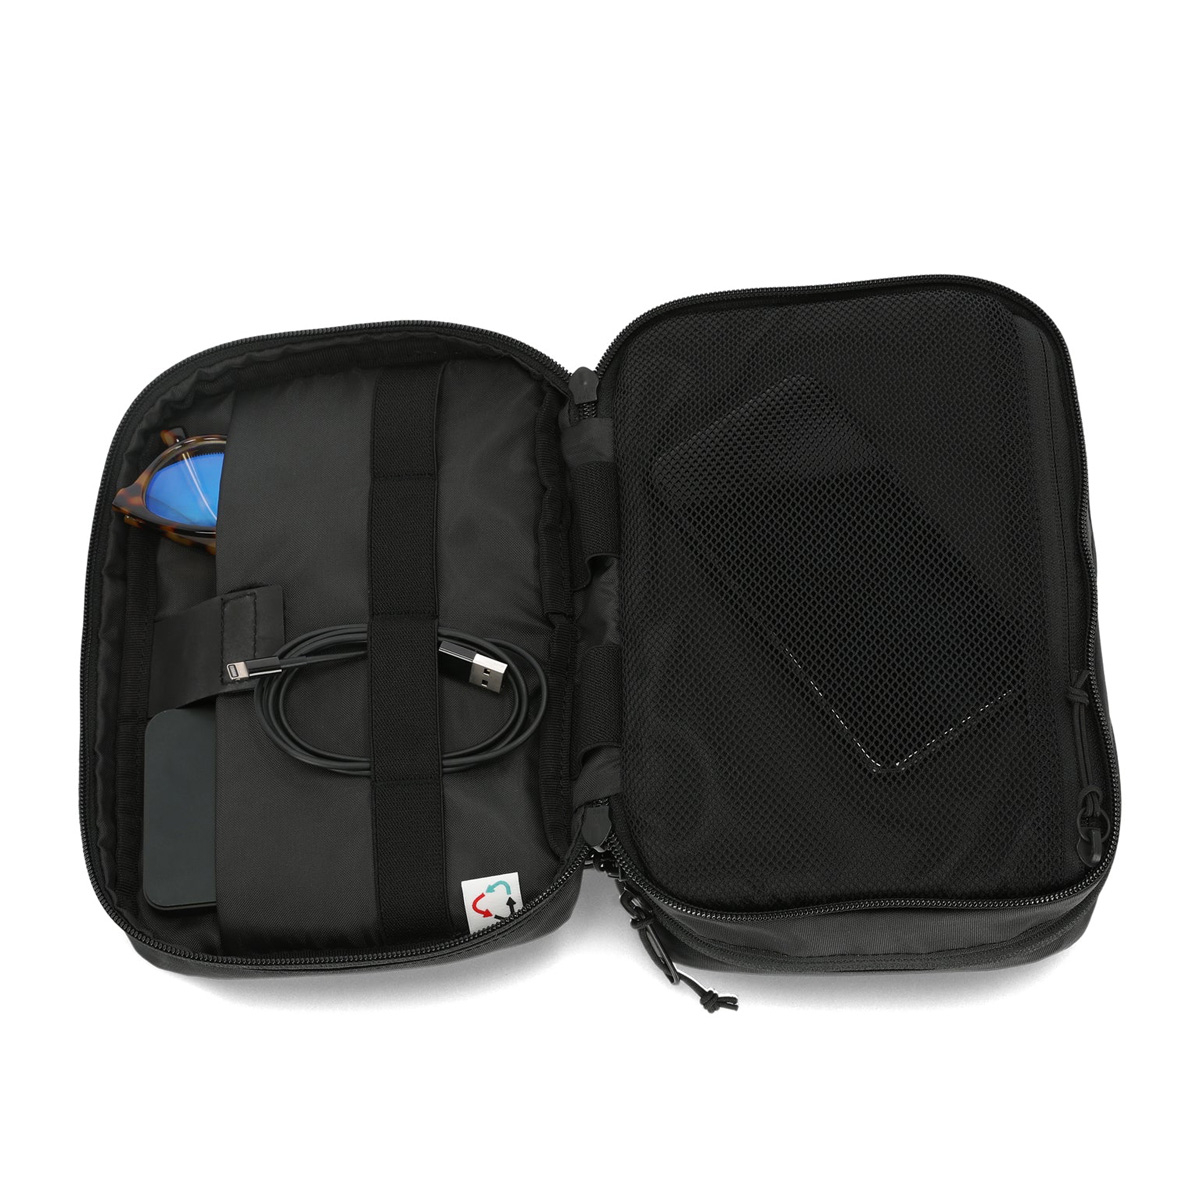 Topo Designs Tech Case Black, with a internal mesh pocket and an internal padded tablet sleeve with elastic daisy chain webbing